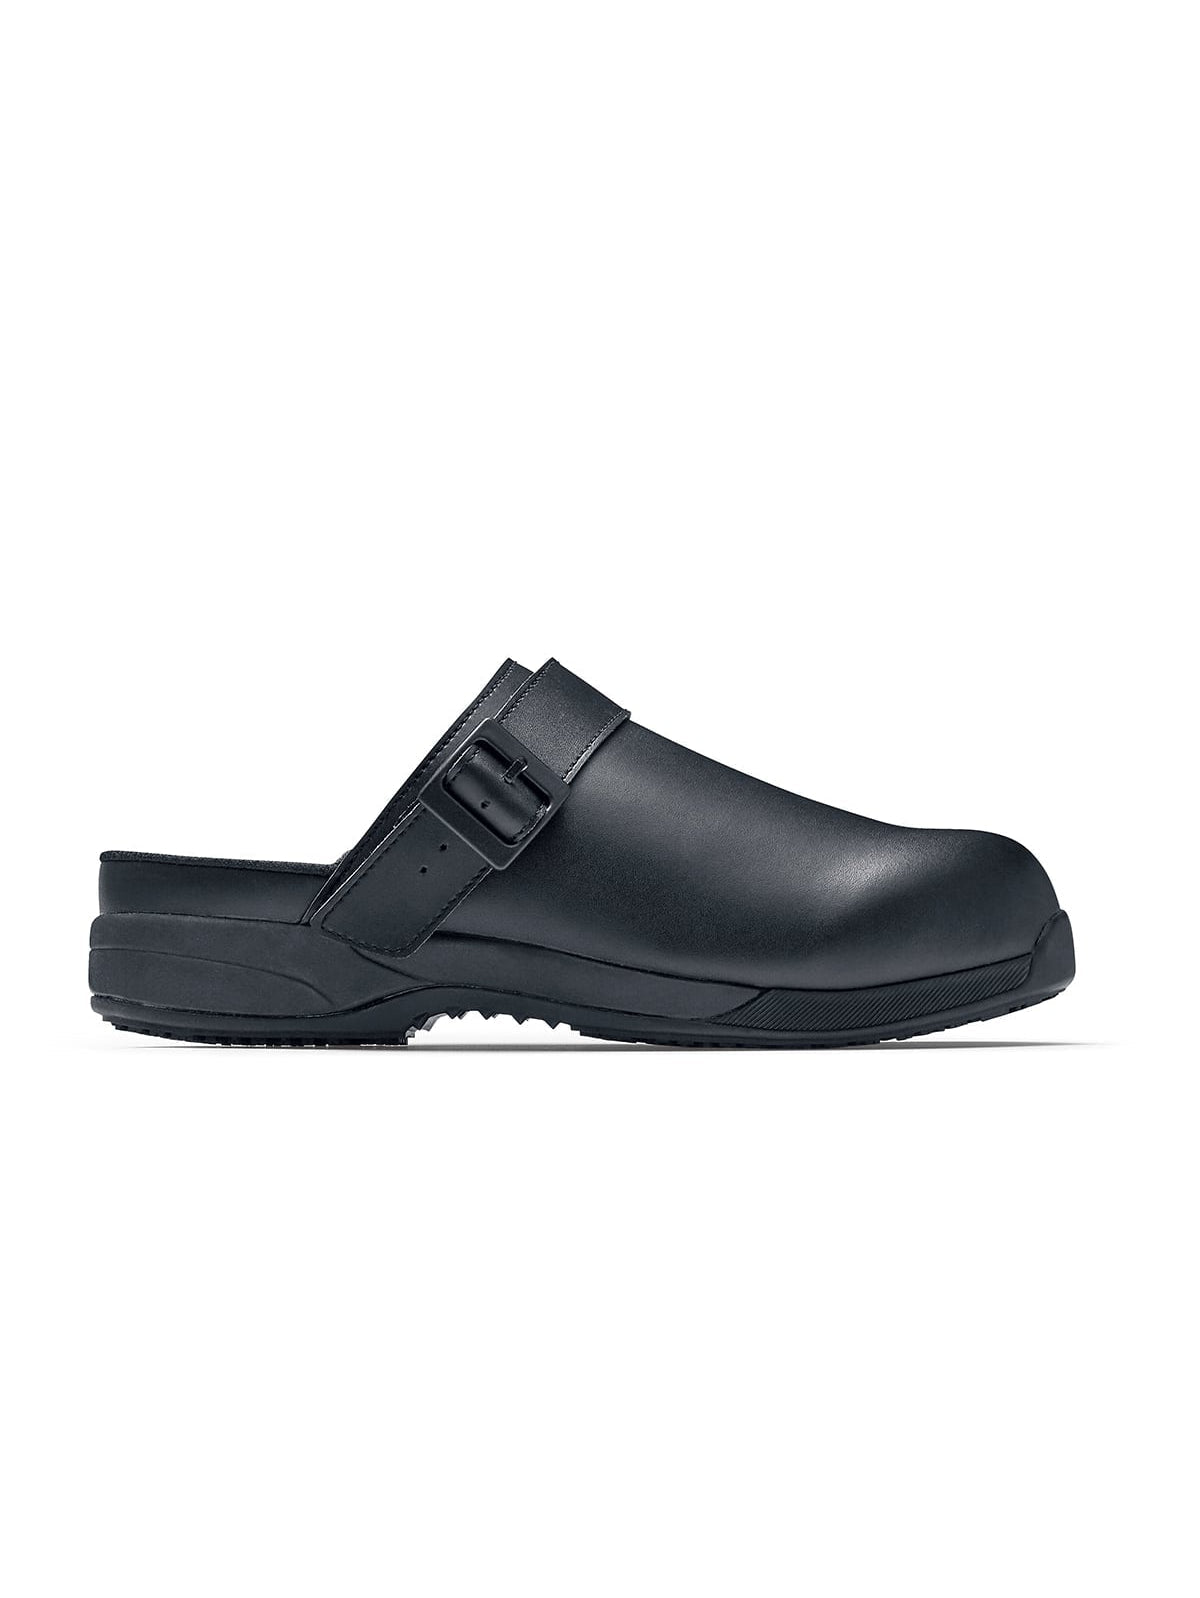 Unisex Work Shoe Triston II Black by  Shoes For Crews.